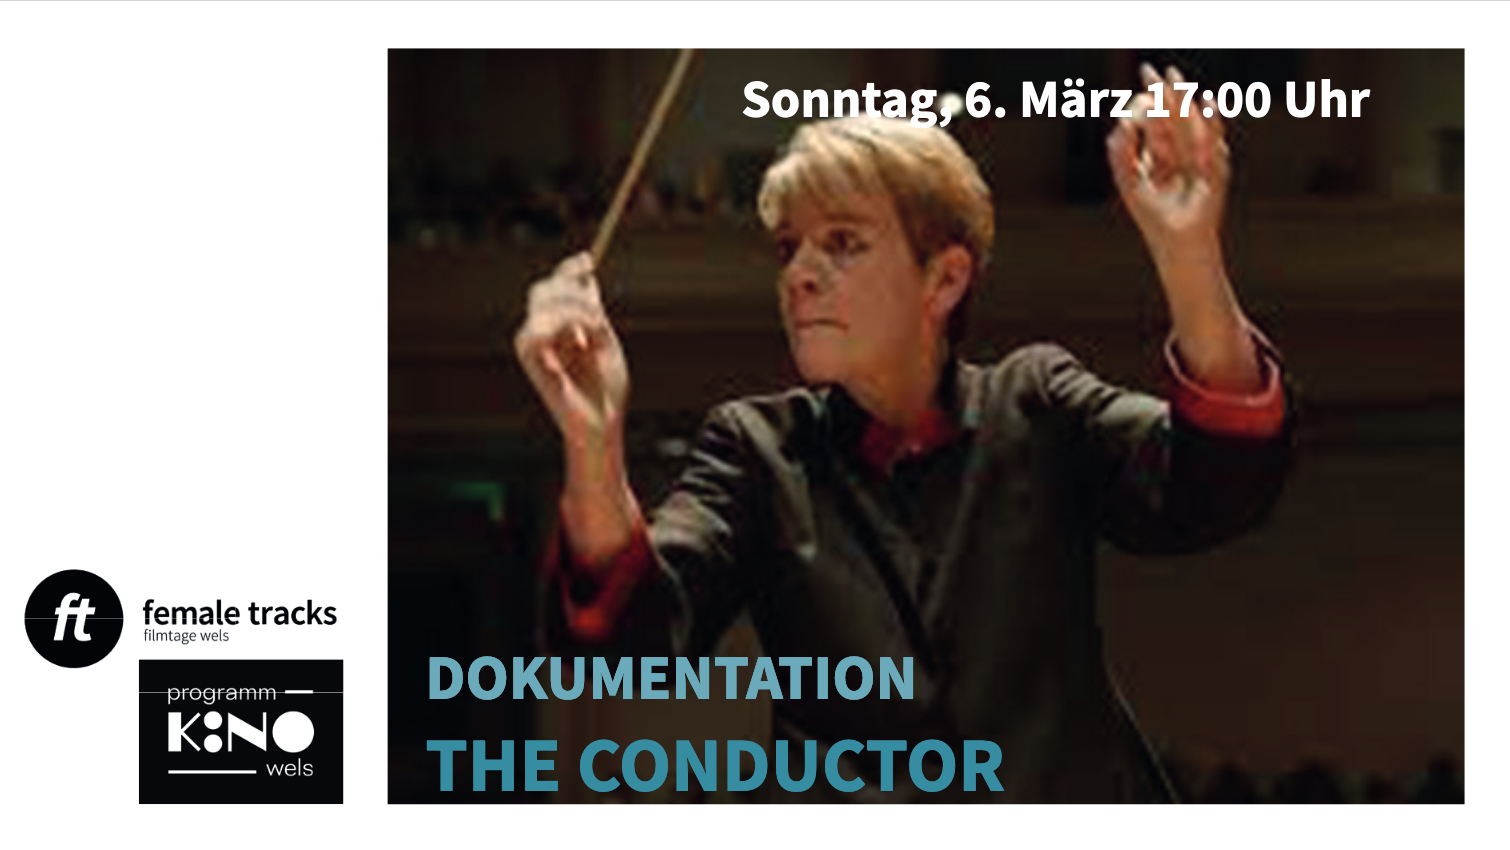 female tracks 2022: THE CONDUCTOR